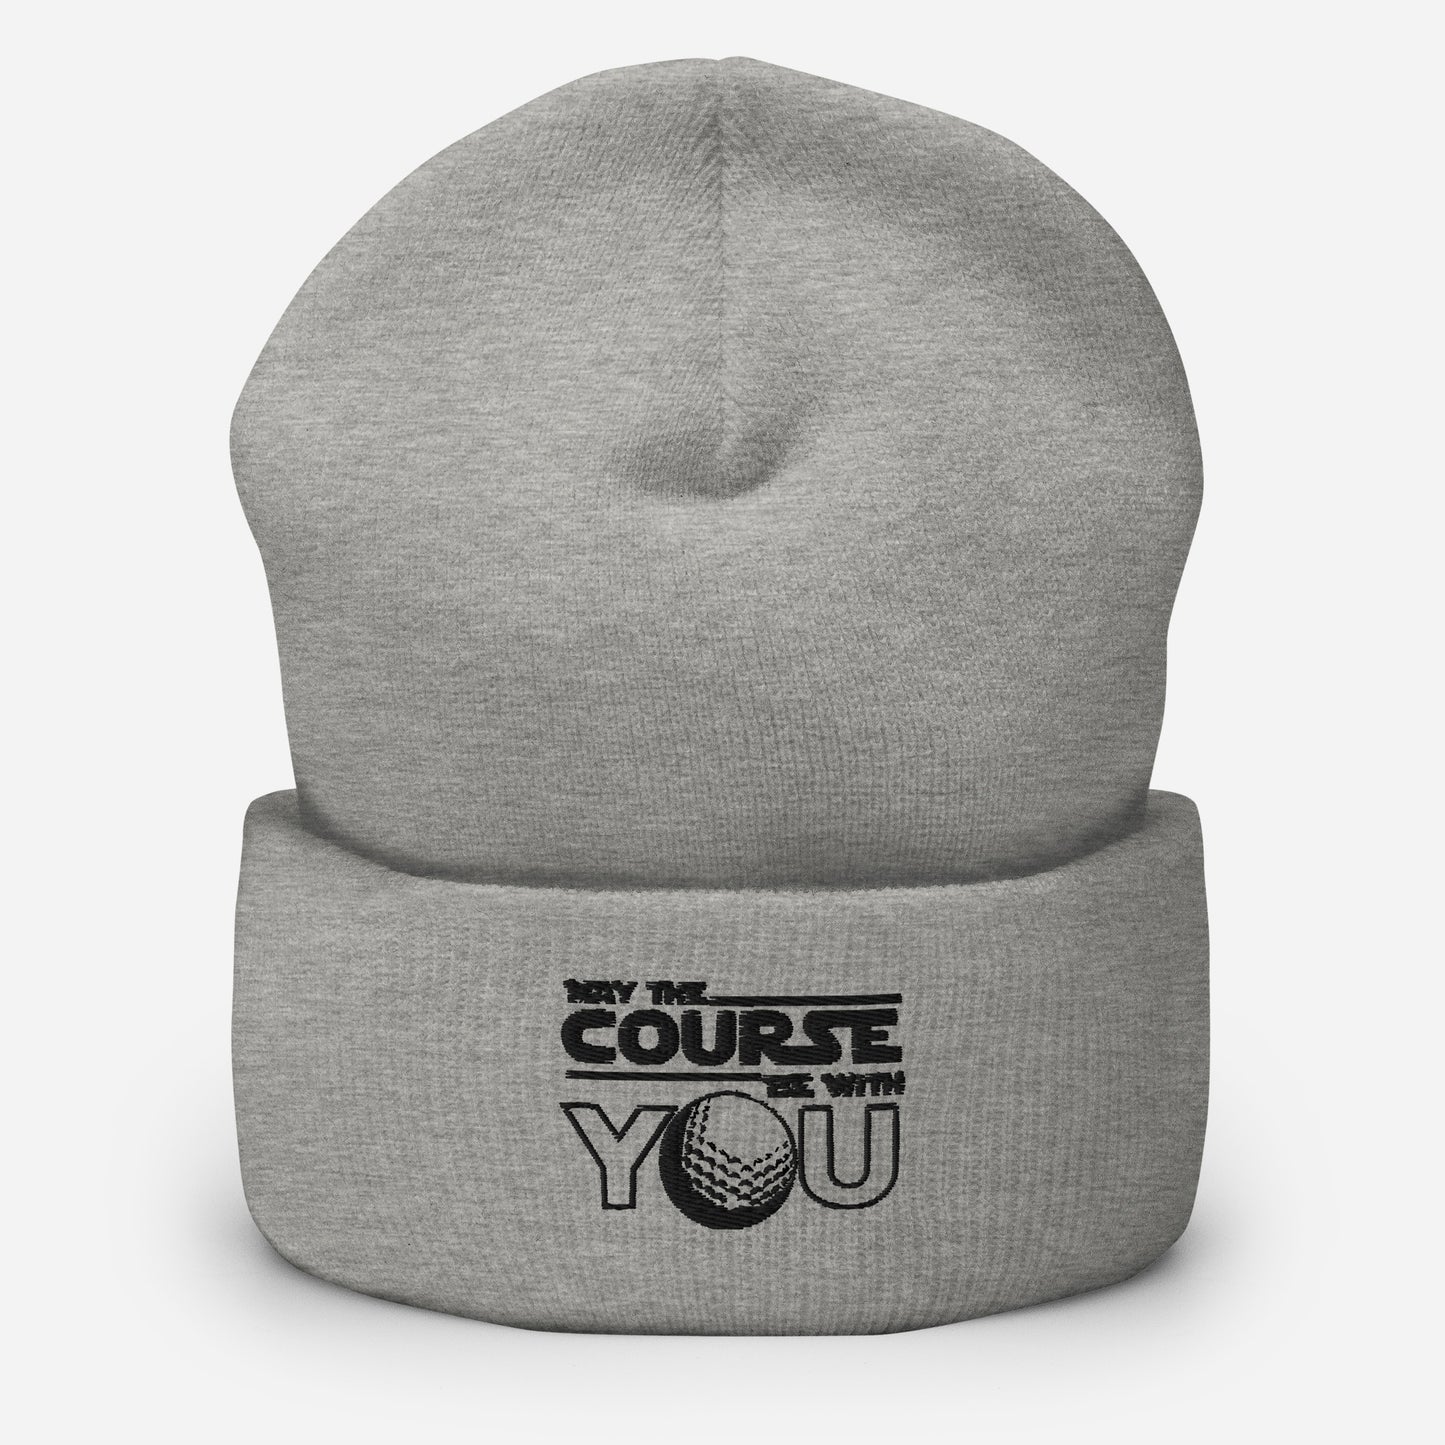 May The Course Be With You Beanie (Yellow, Red, White, Grey)